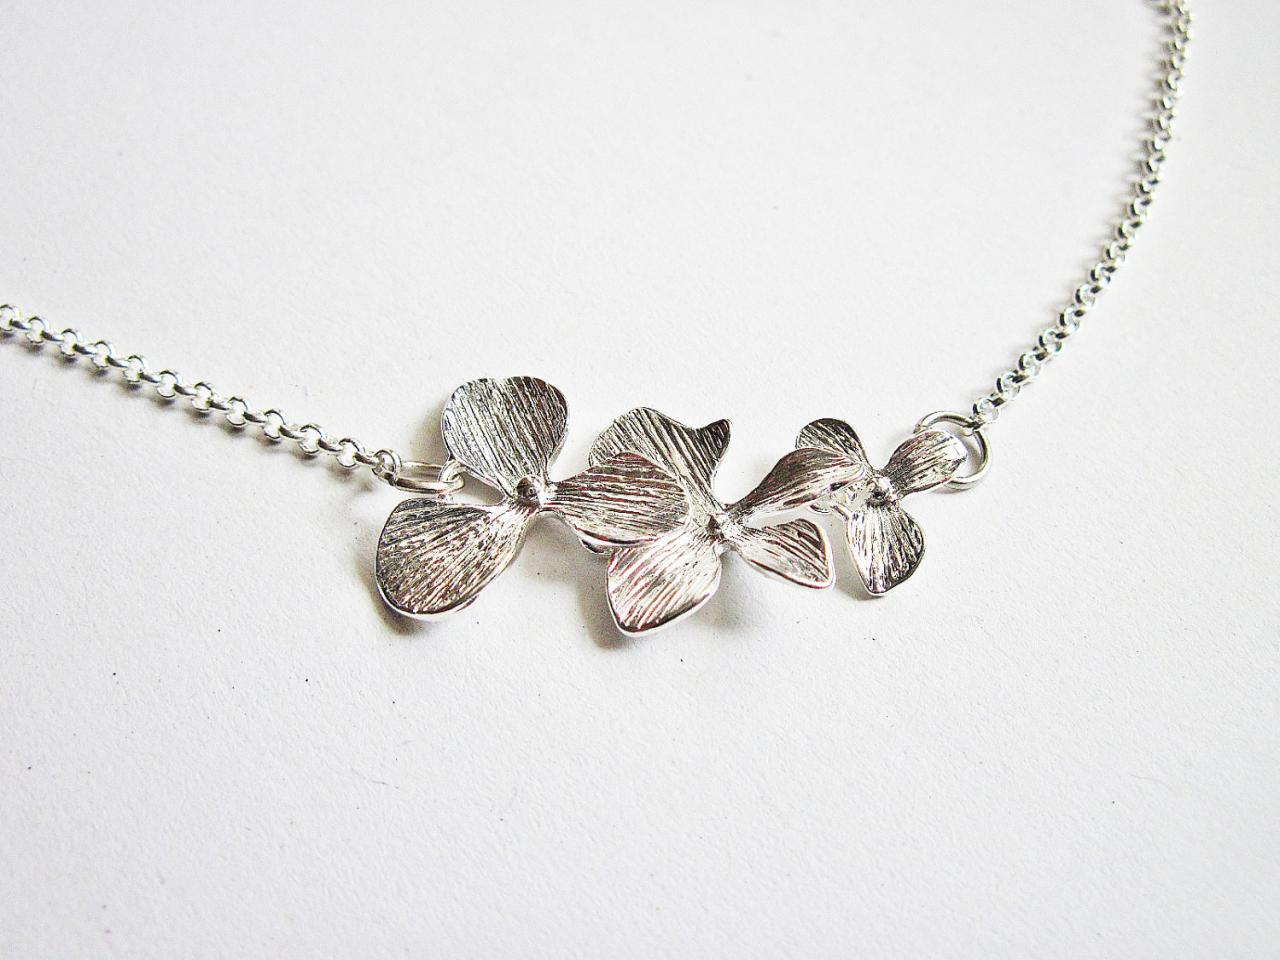 Orchid Flower Necklace, Dangling Orchids Flowers, Floral Necklace, Flower Necklace, Flower Jewelry, Floral Jewelry, Bridesmaid Necklace